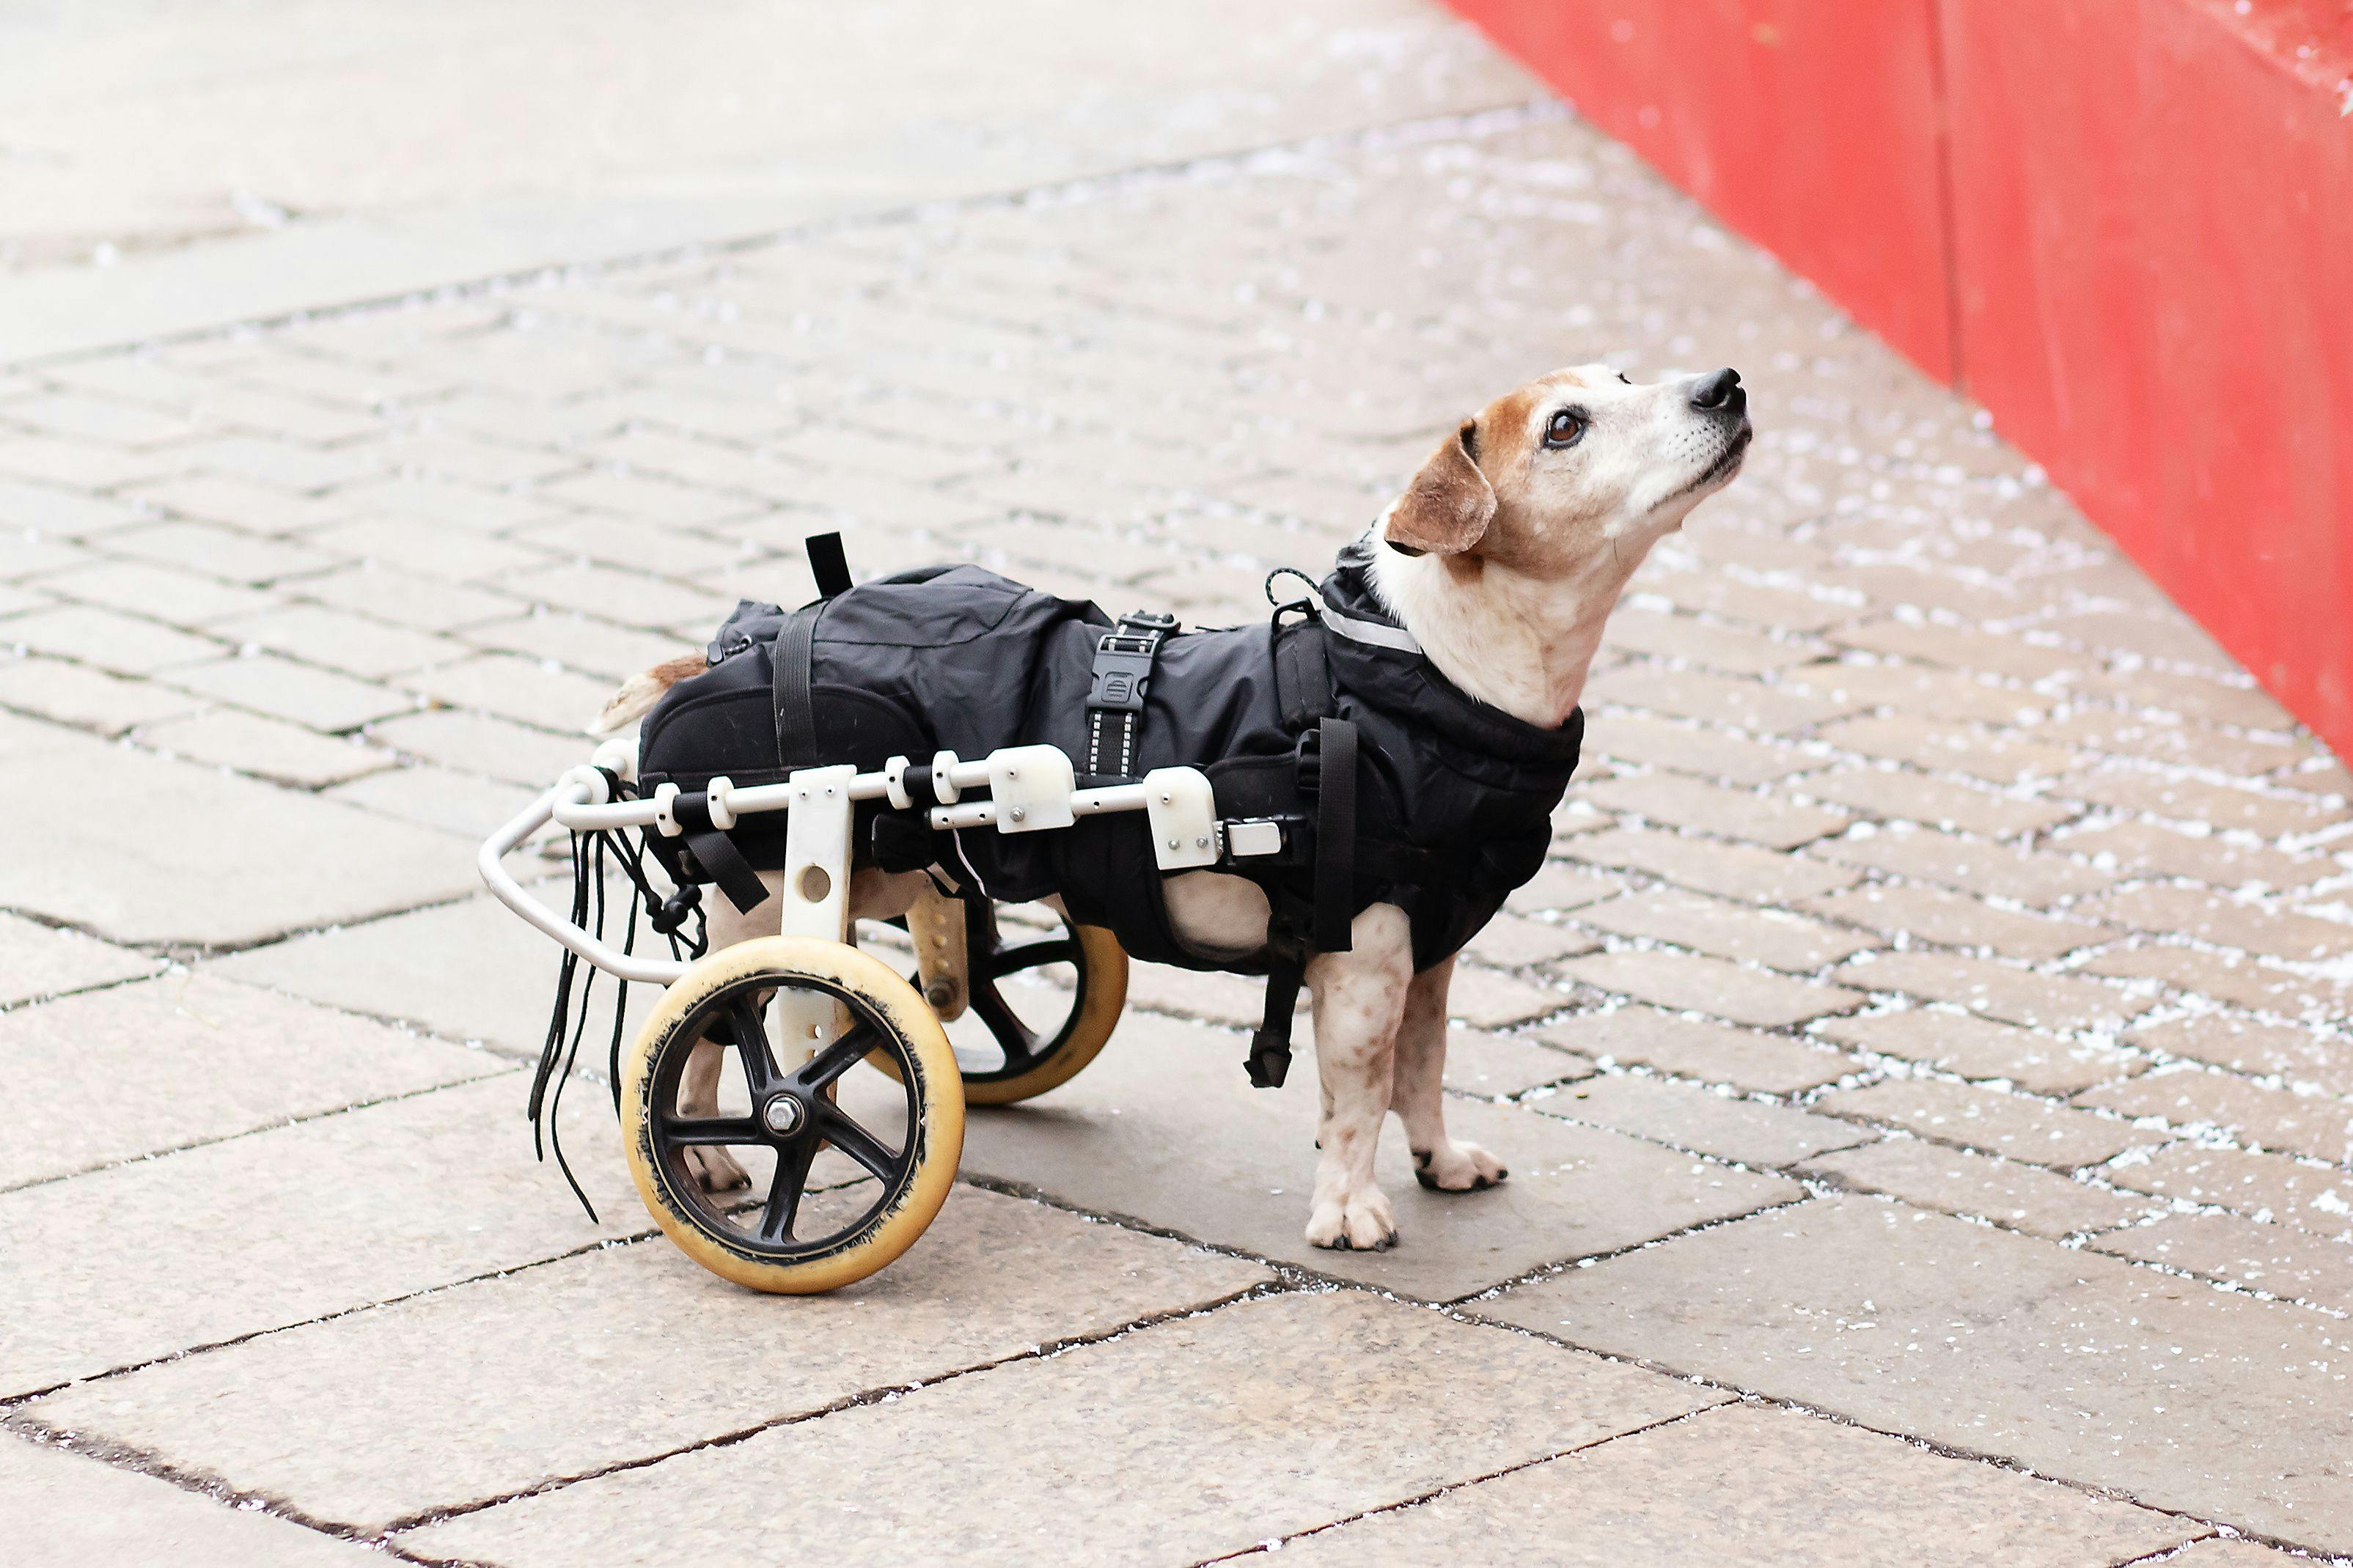 Caring for disabled pets: balancing medicine and compassion